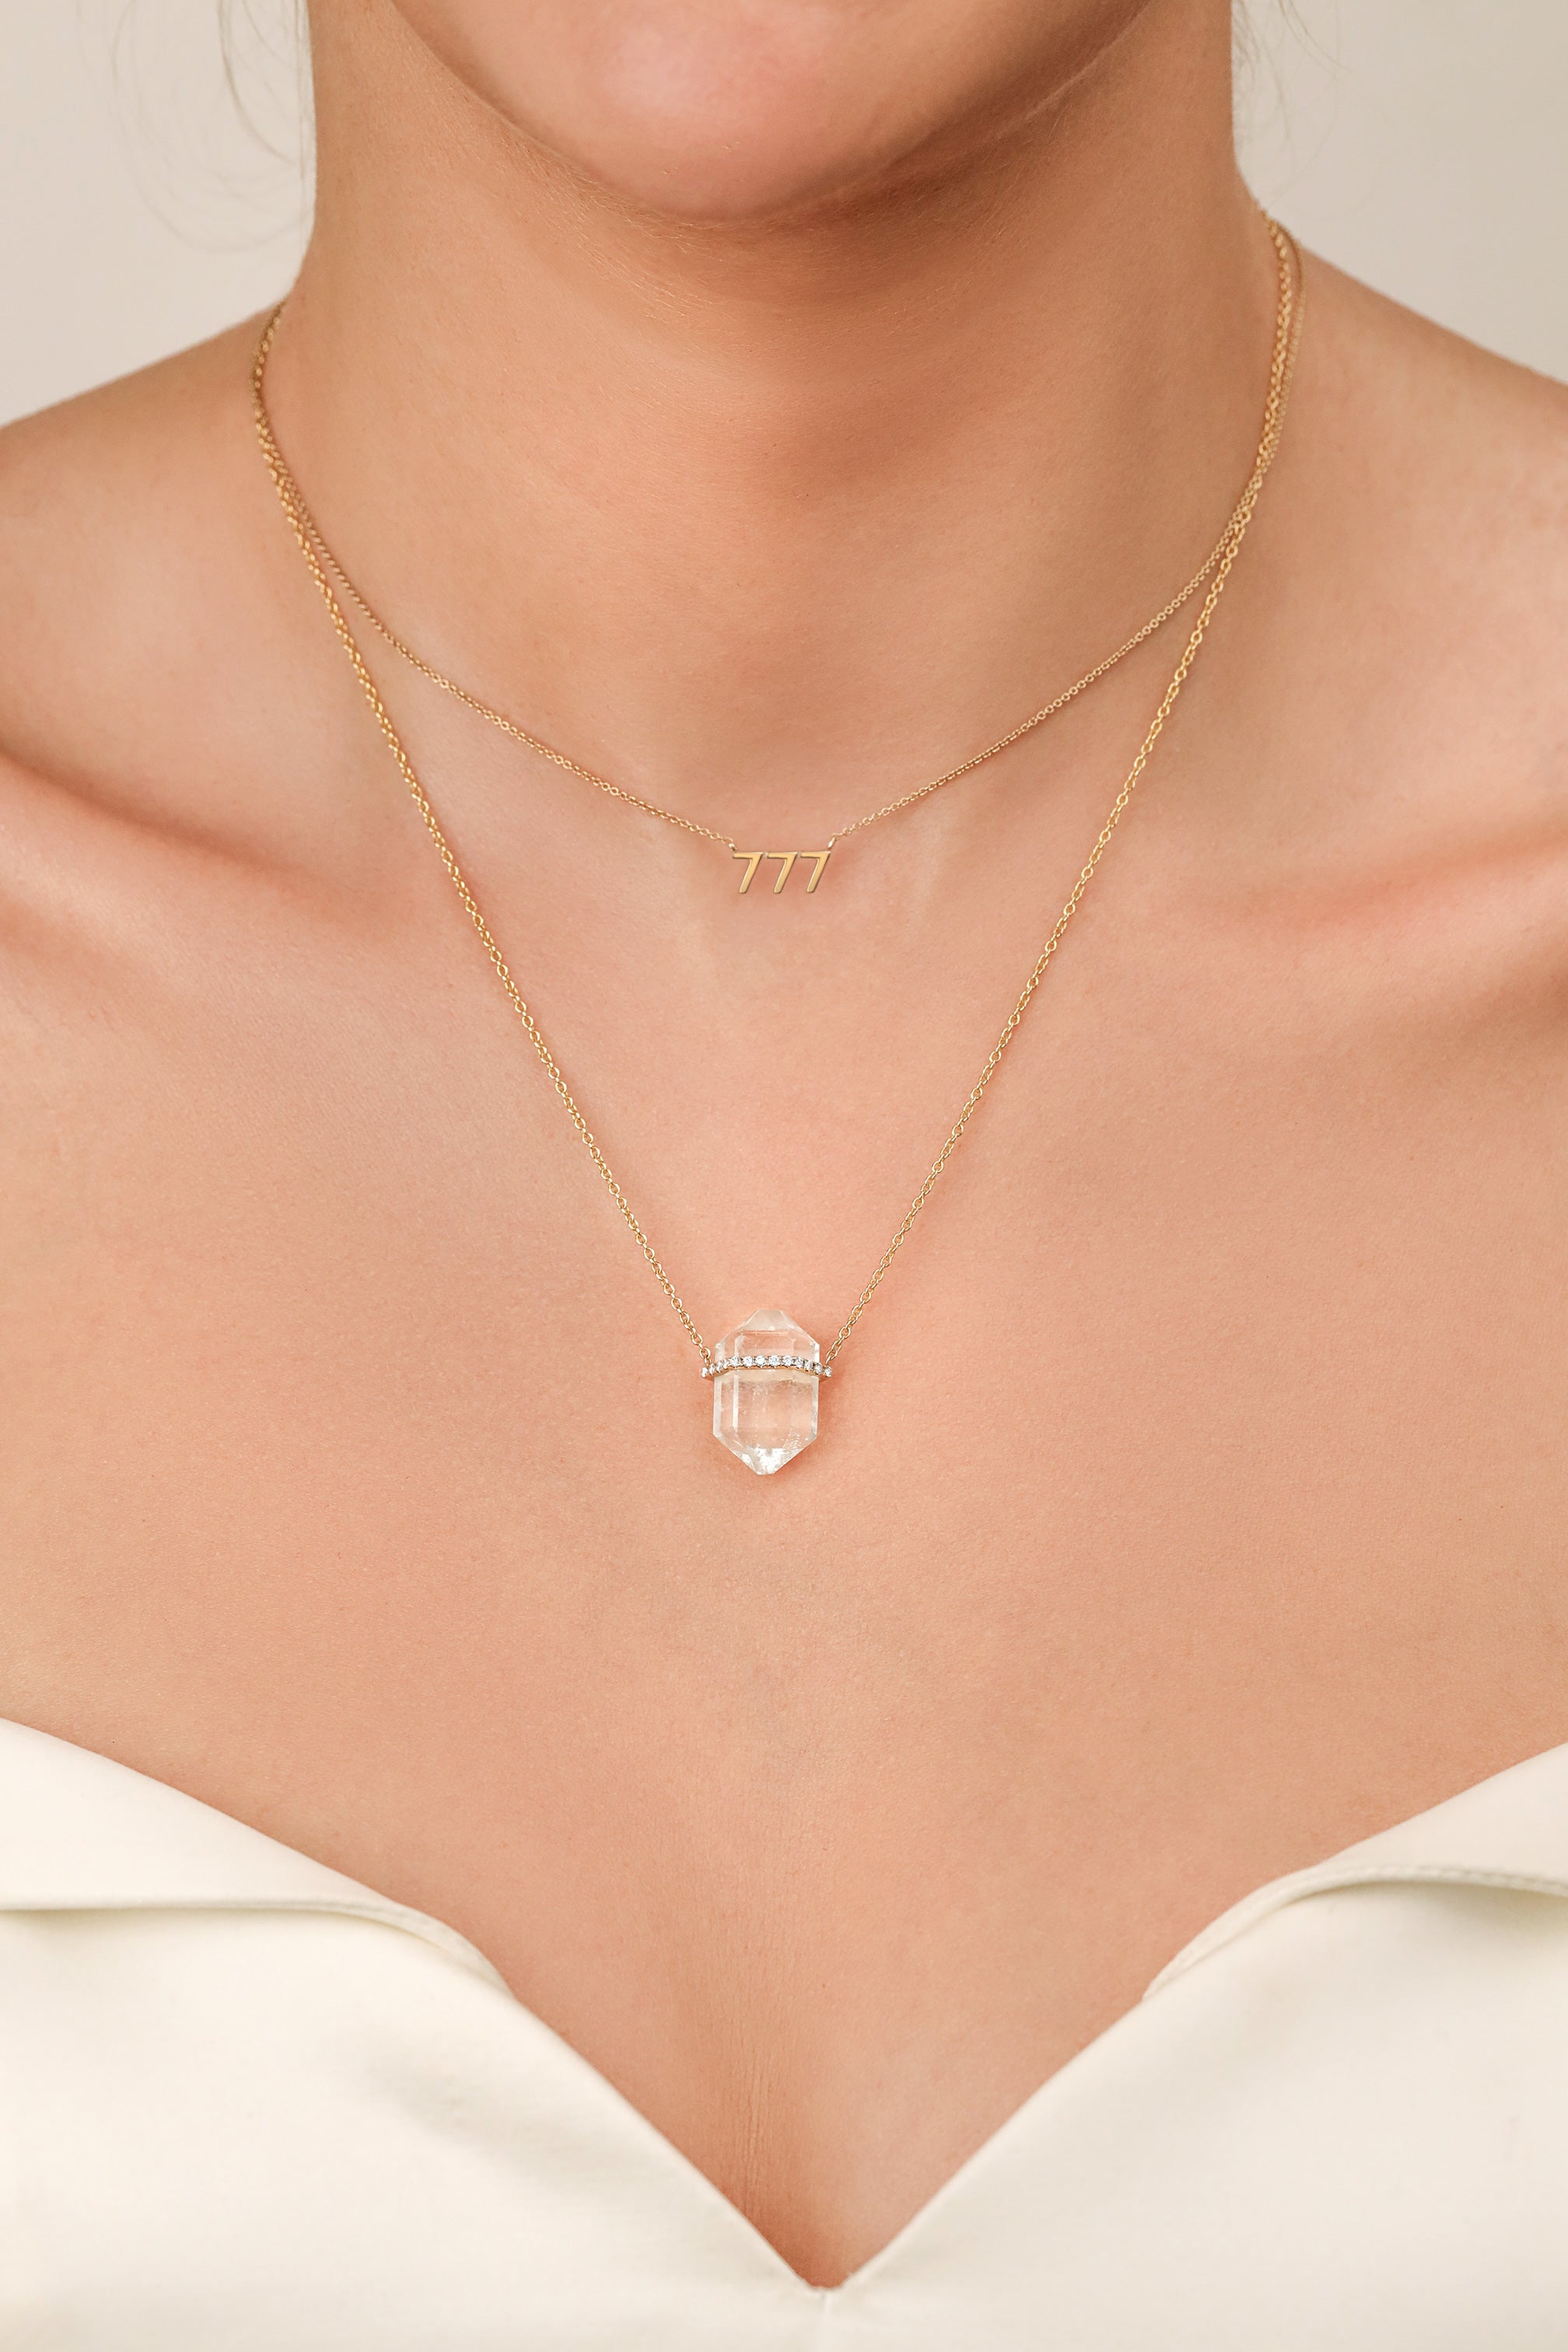 woman wearing aquamarine crystal pendant and 777 pendant by carter eve jewelry